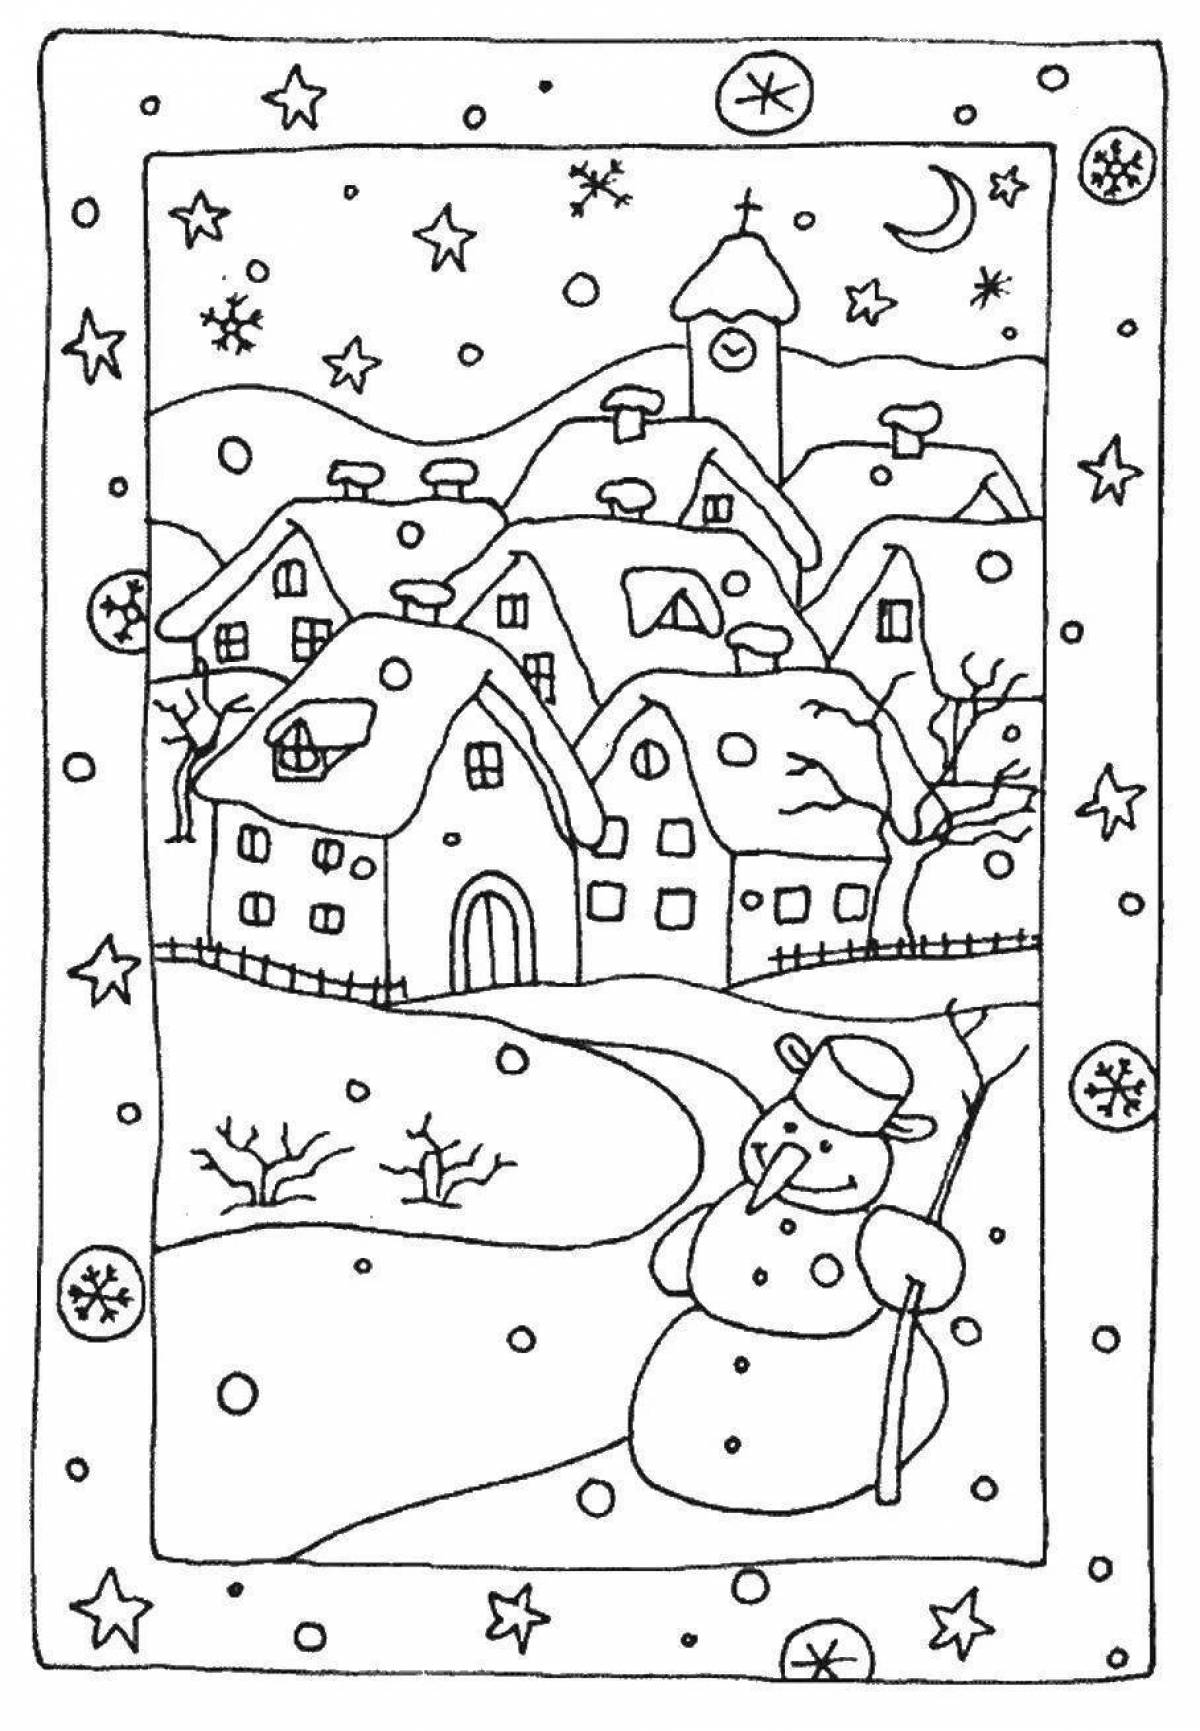 Adorable winter coloring book by numbers